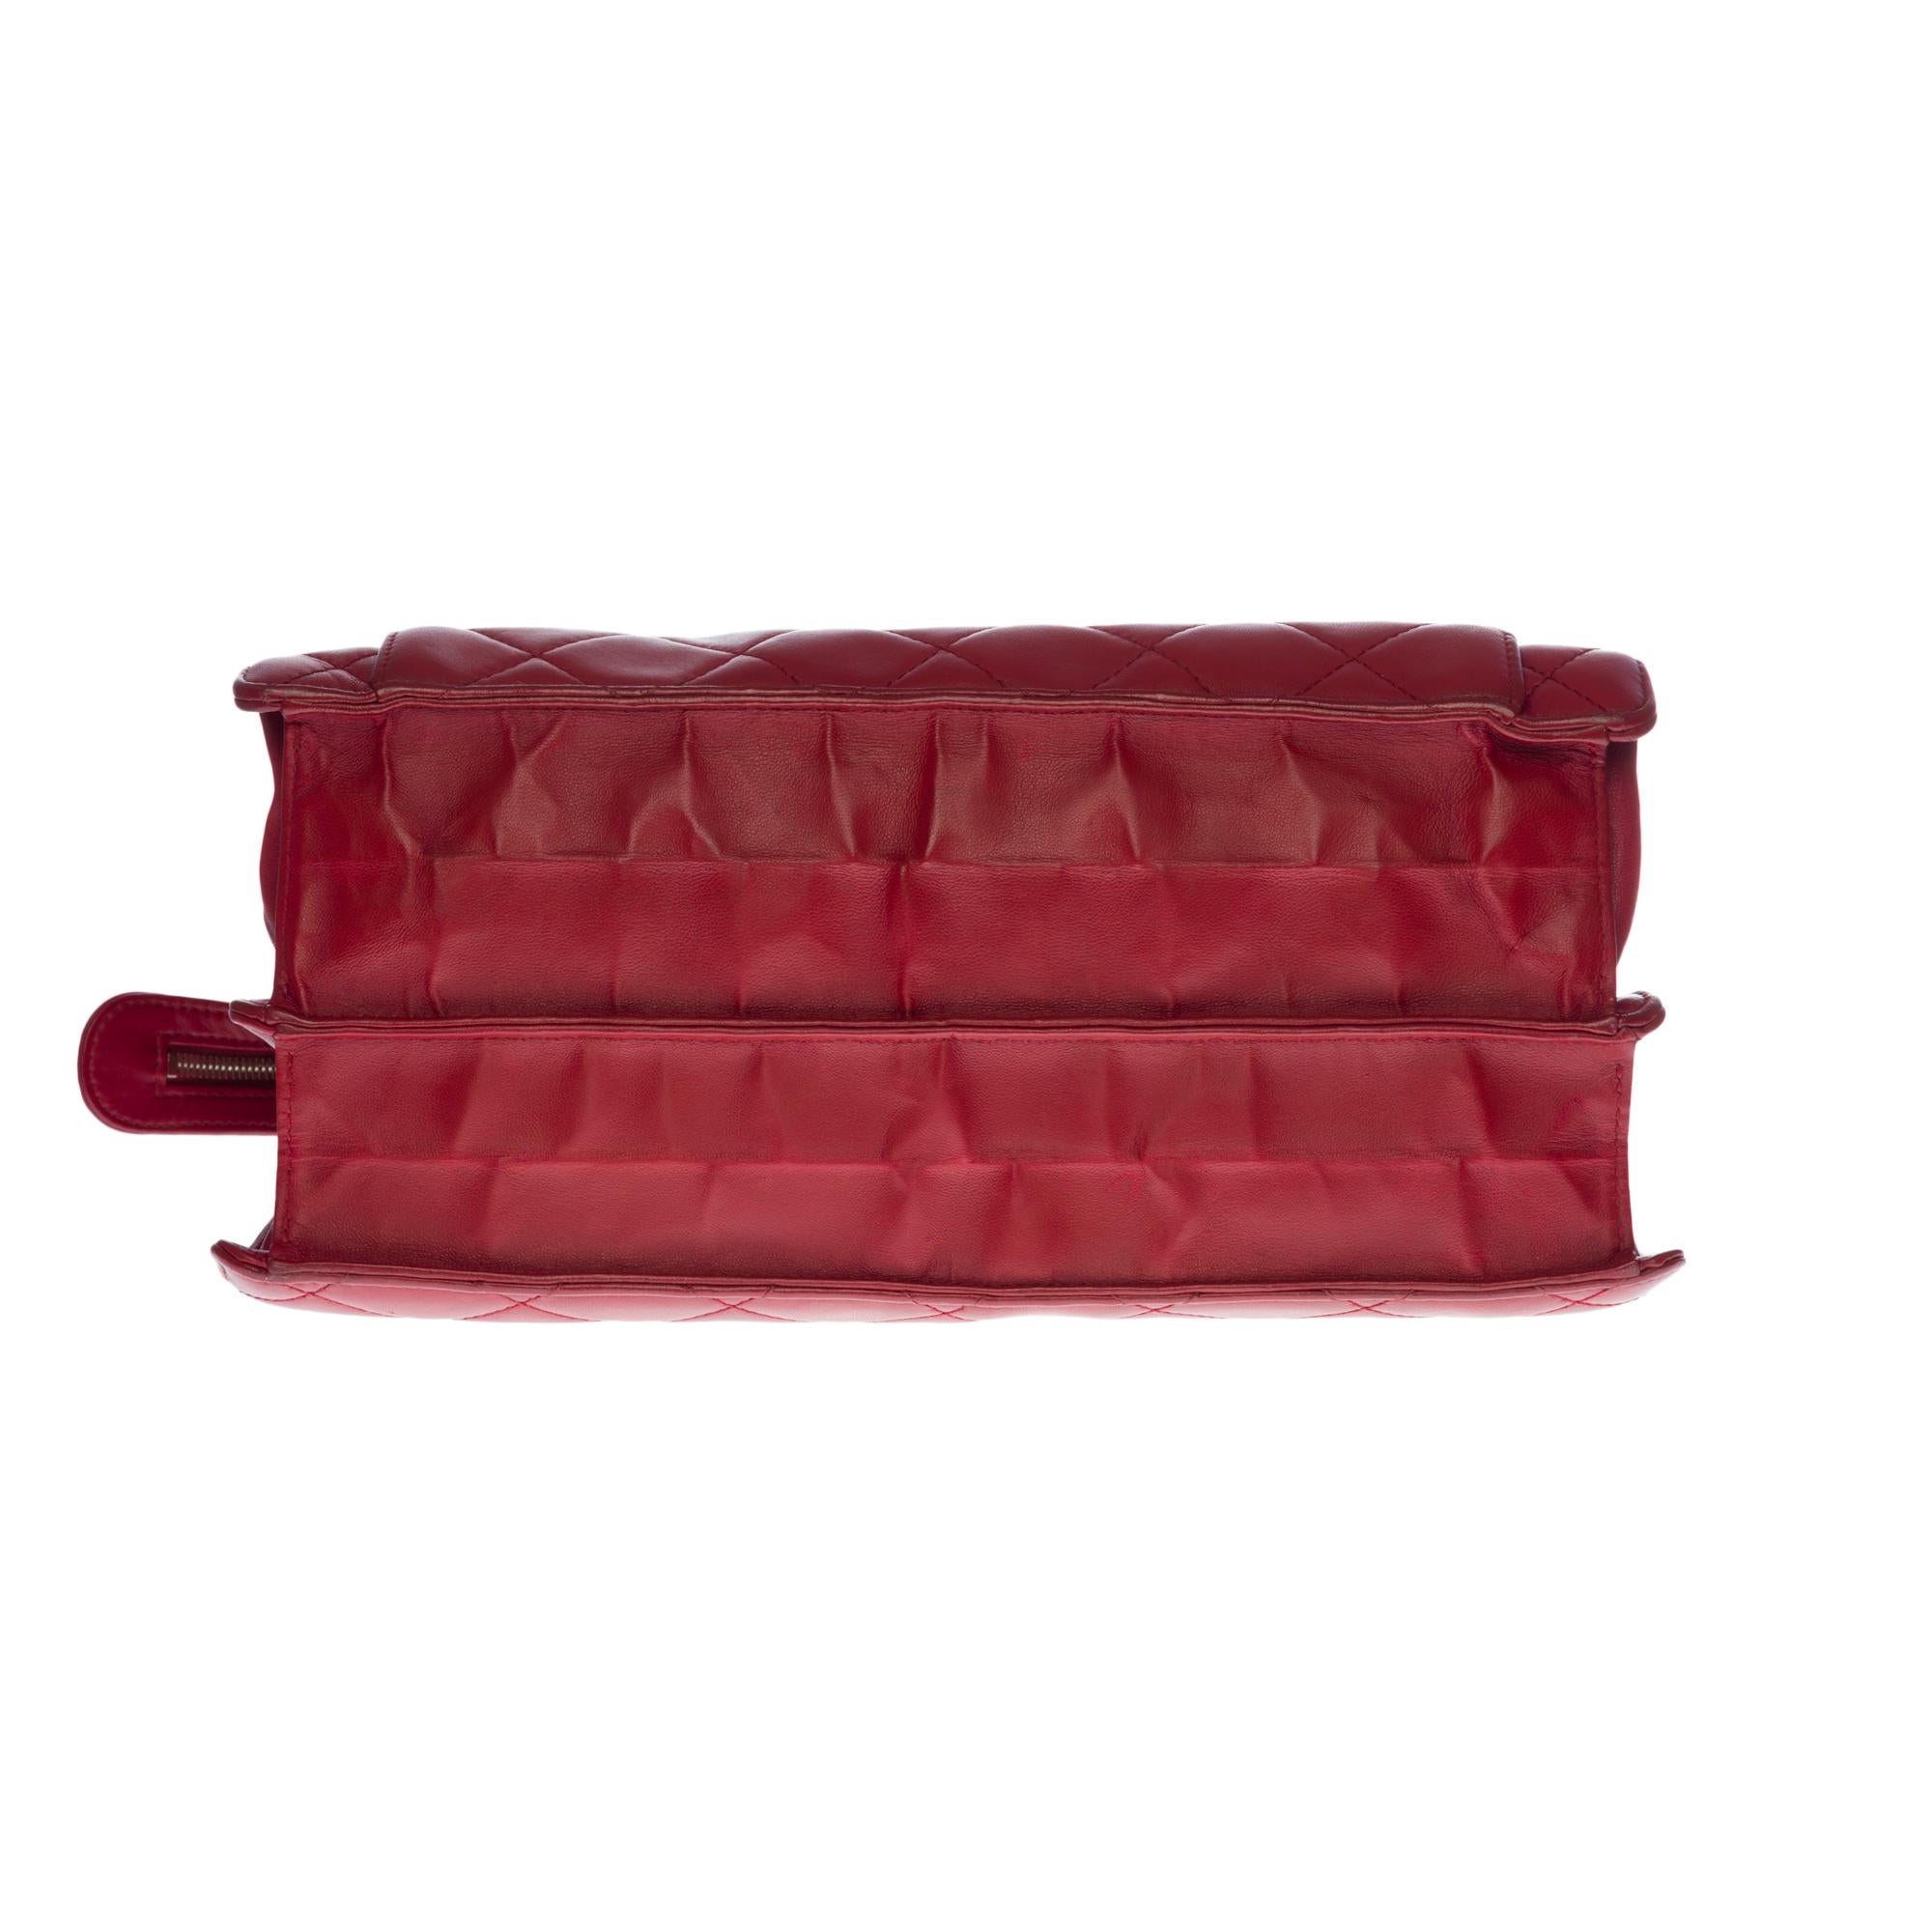 Chanel Classic 2.55 Maxi shoulder bag in red quilted leather, SHW 2